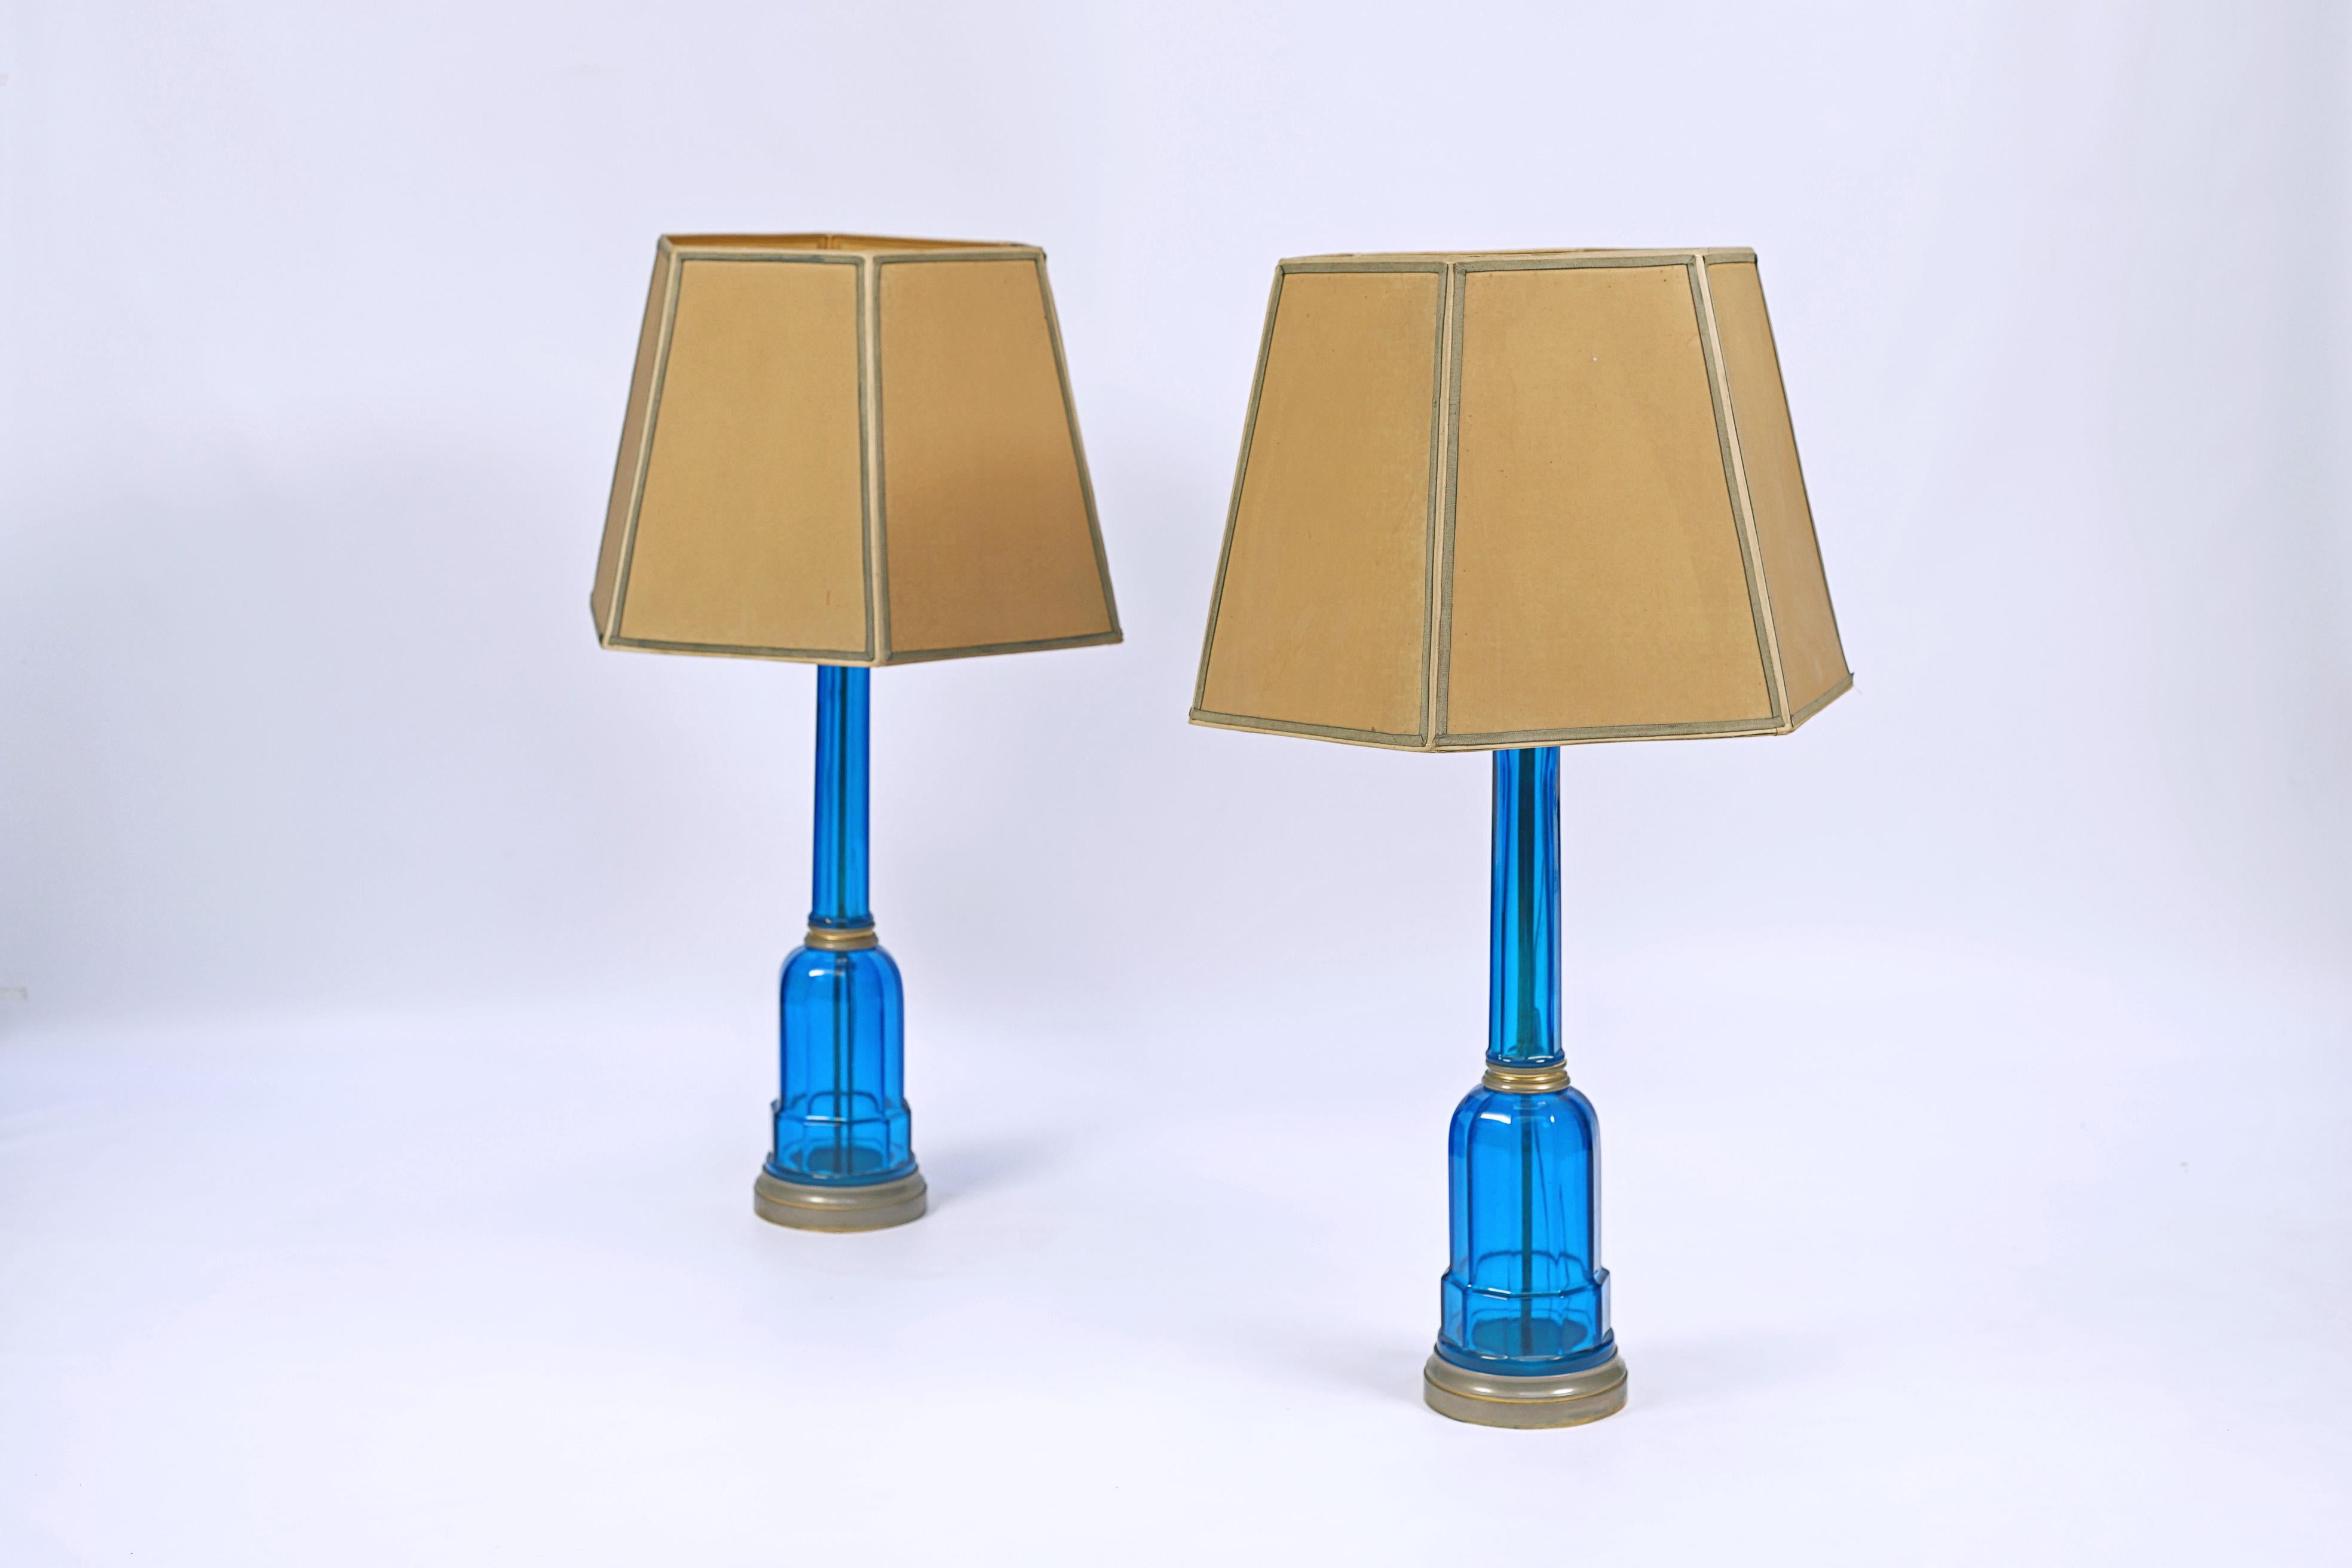 Pair of blue crystal lamps. Hexagonal shape and details in bronze.

Europe, circa 1930.